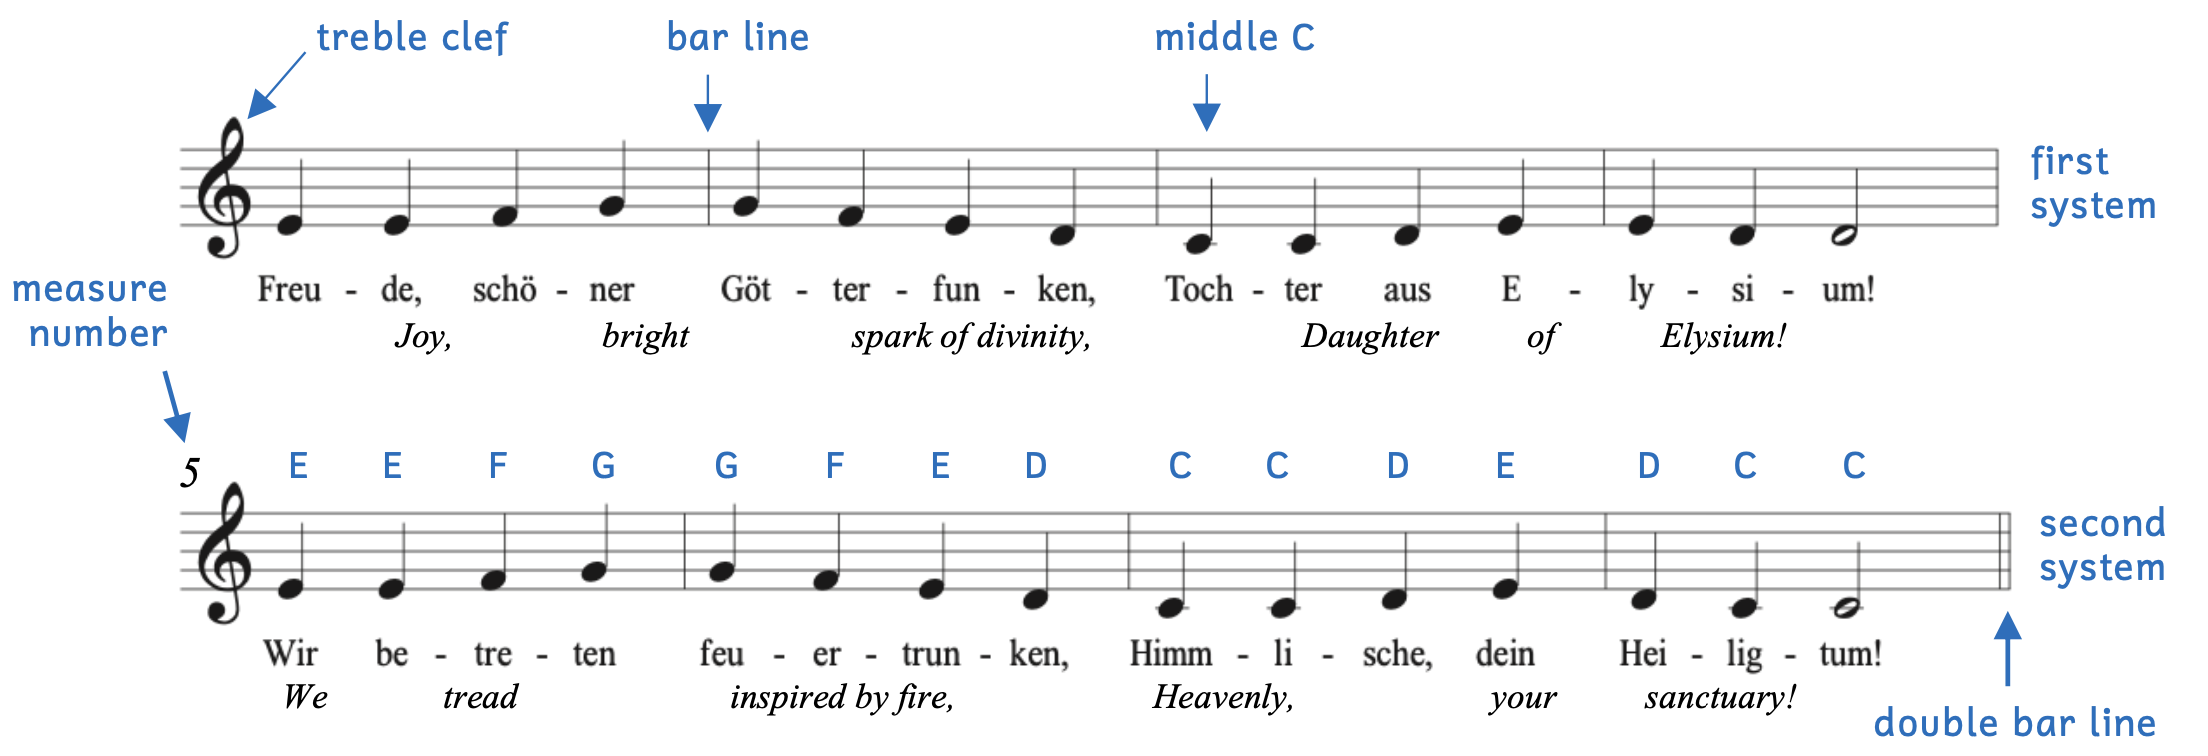 Terms we have learned are shown in Beethoven's Ode to Joy. The example begins with treble clef. There are bar lines and the example ends with a double bar line. Middle C is pointed out in the first system. The second system shows the measure number on the top left corner, which is measure 5.